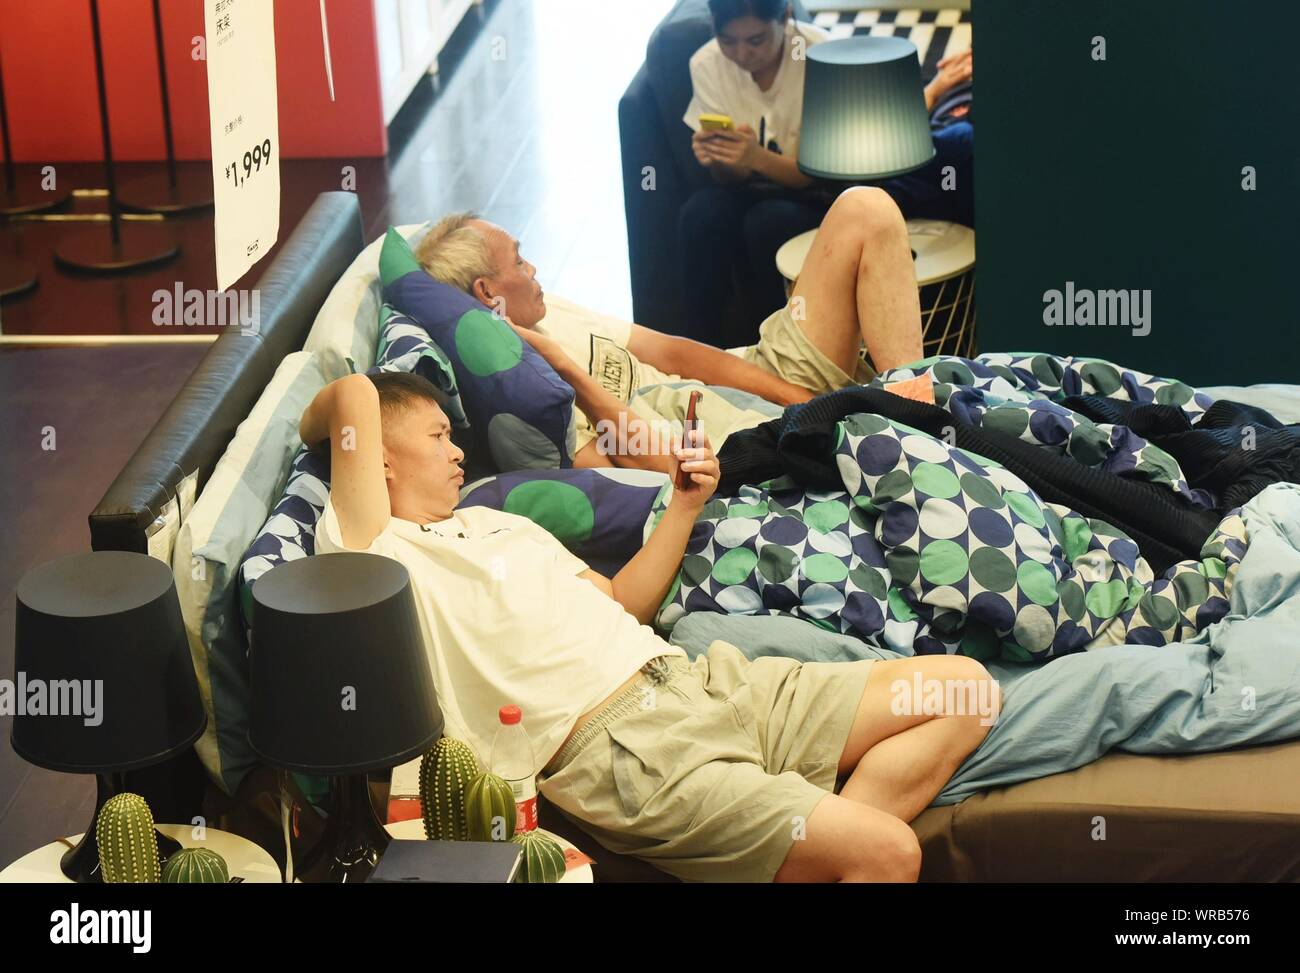 Local Chinese residents nap or rest on the bed or in the sofa at an air-conditioned IKEA furnishing store to escape the heatwave on a scorcher in Hang Stock Photo